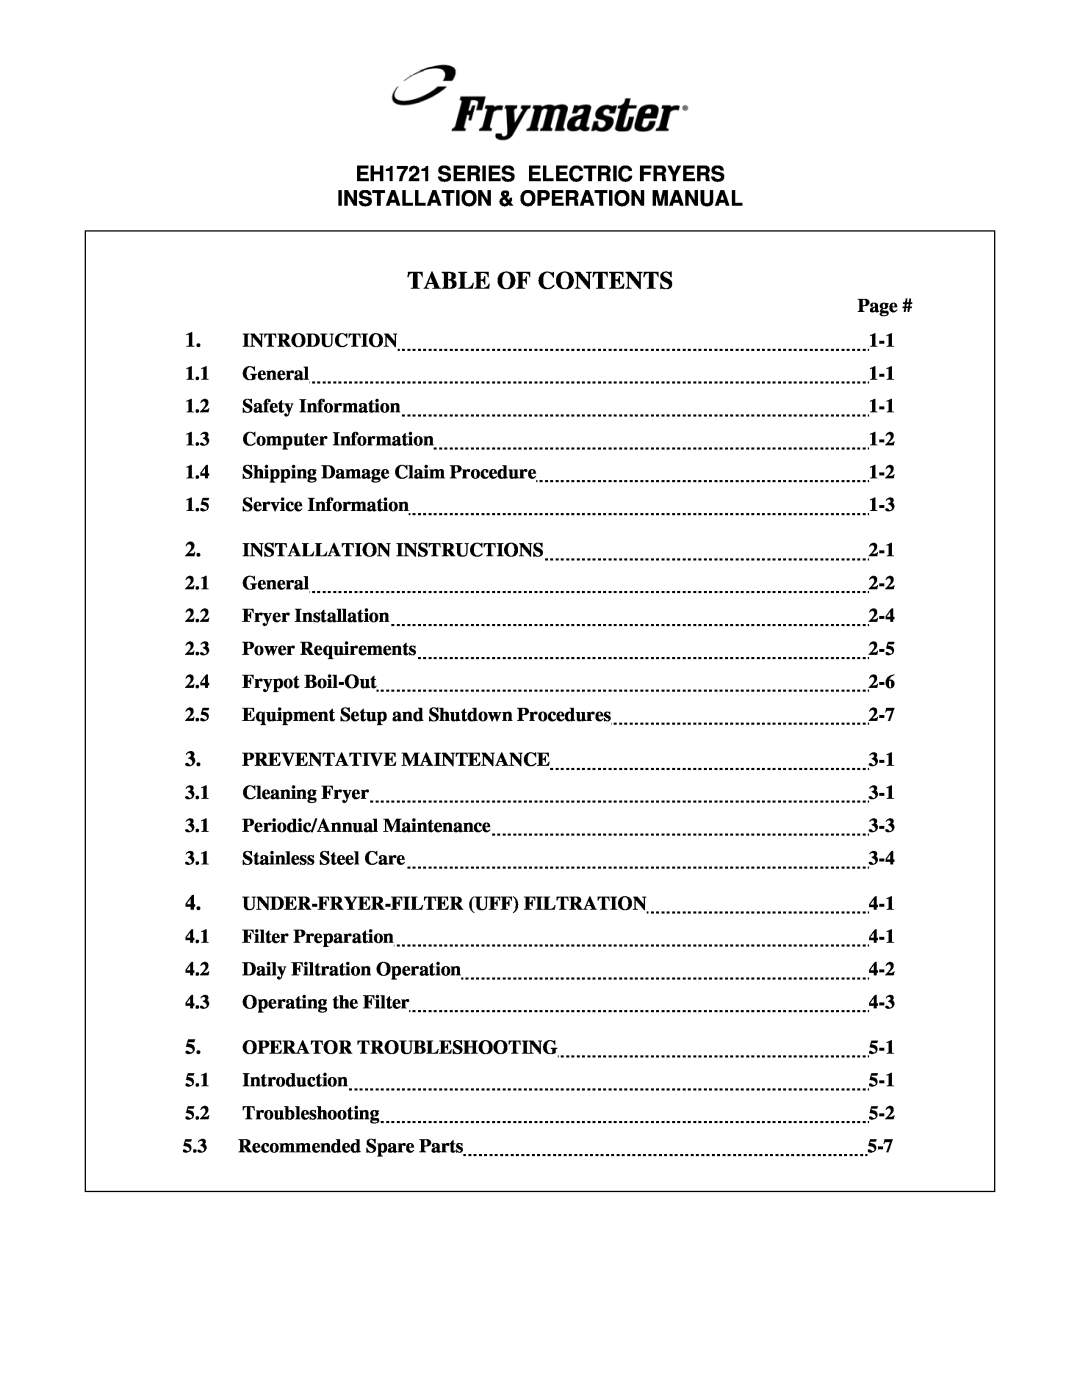 Frymaster BIH1721, FPH1721 operation manual Table Of Contents 